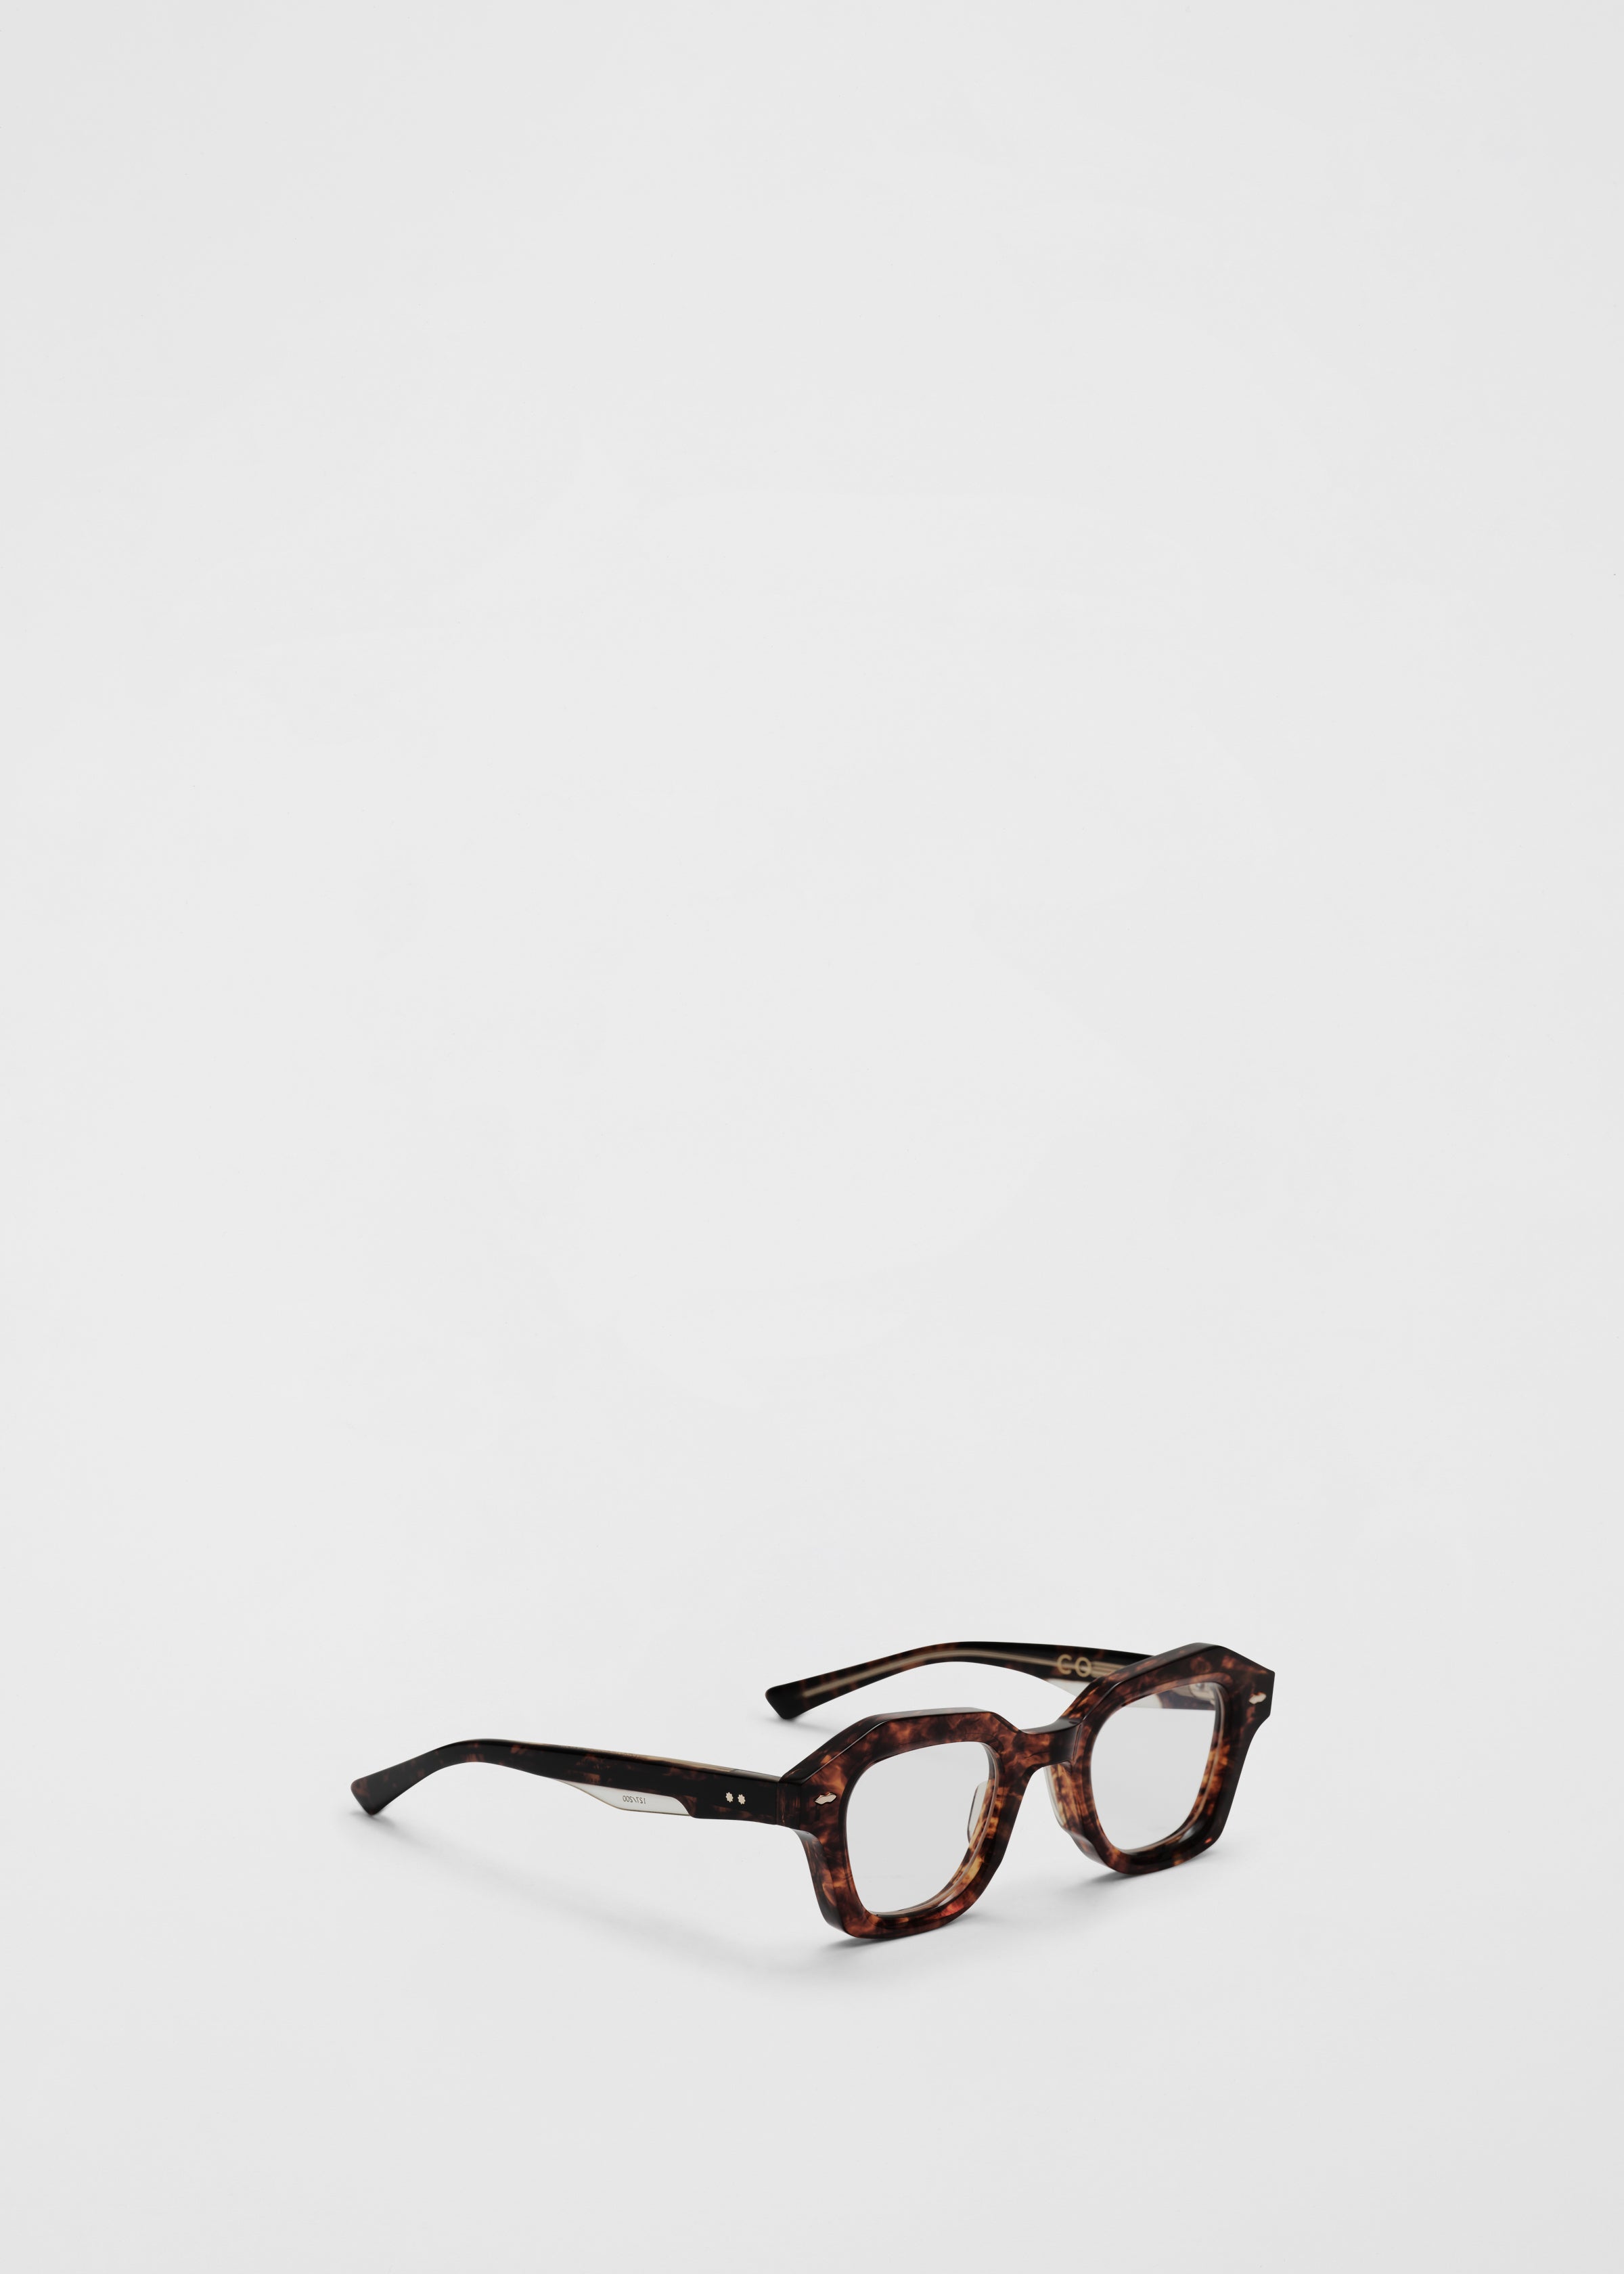 Schindler Glasses in Argyle - CO Collections